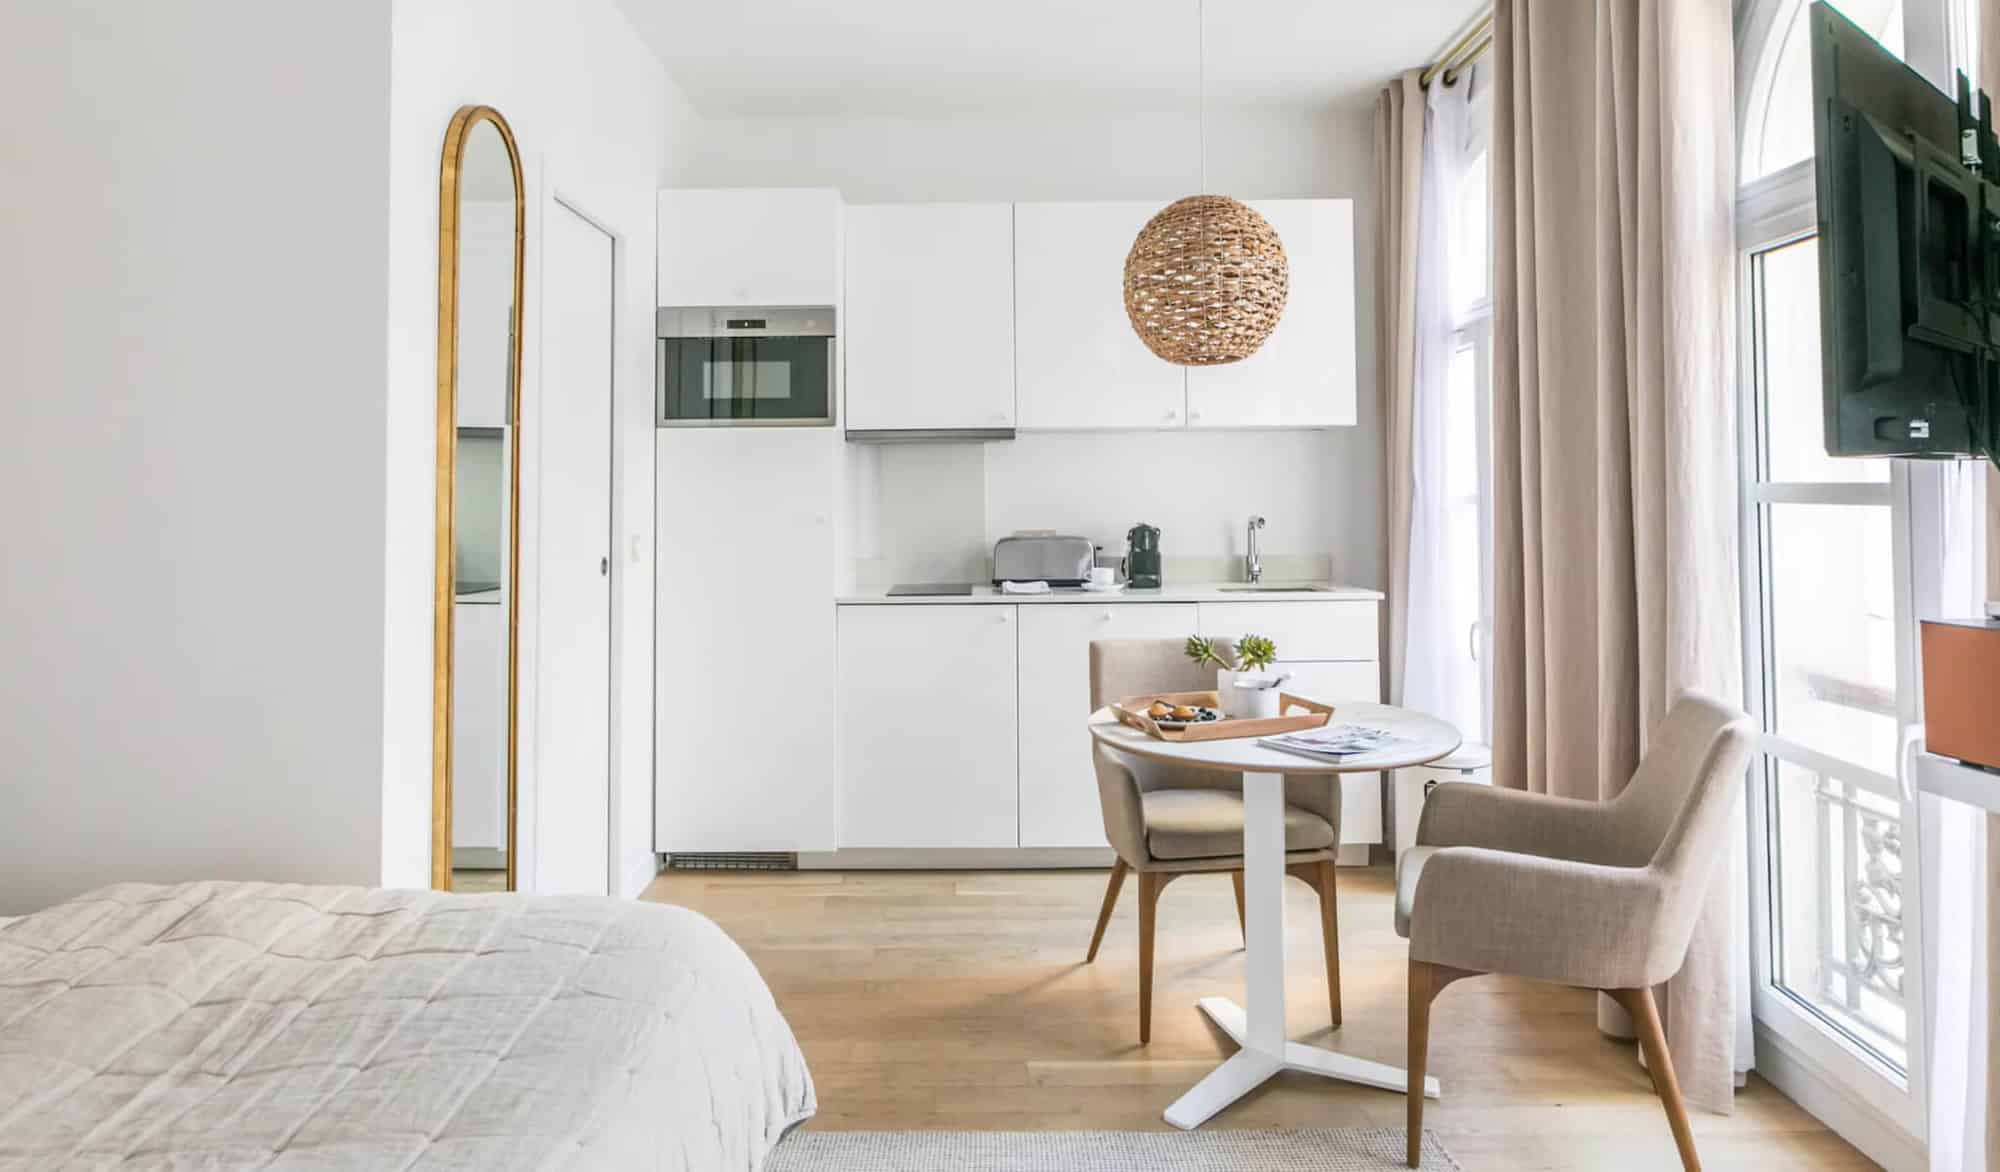 A studio with white walls and kitchen cabinets, a bed with beige linens, beige curtains, a white round dining table and 2 beige chairs.